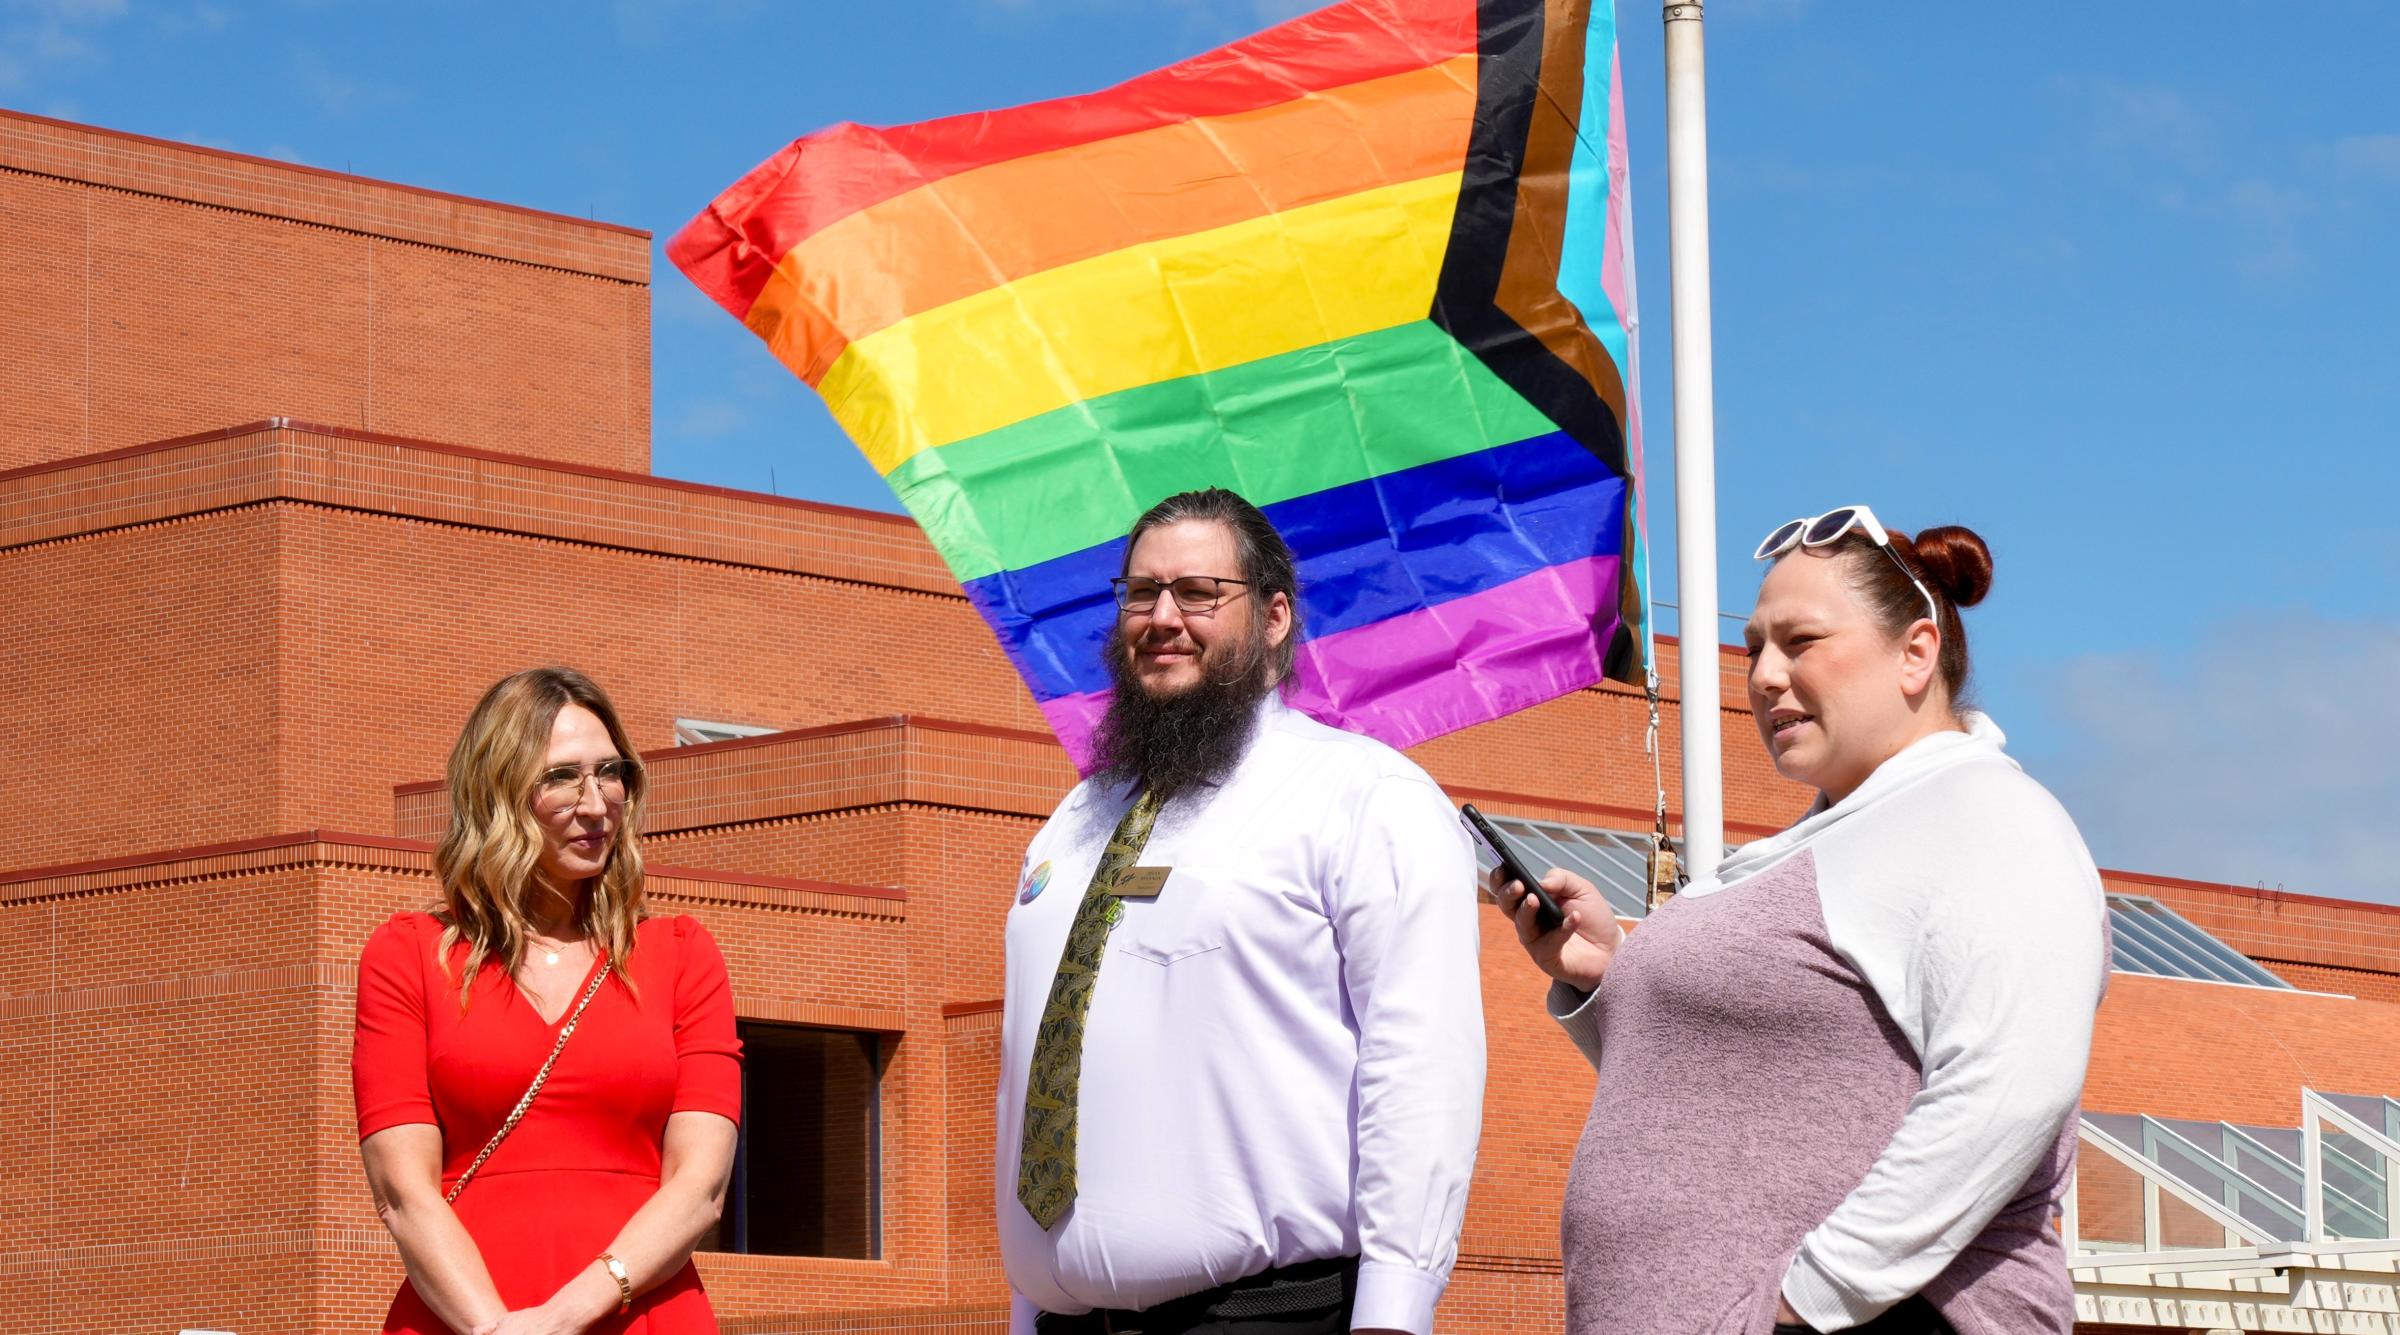 A group of three people stand in front of the Pride flag as it is raised up a flagpole at RDP